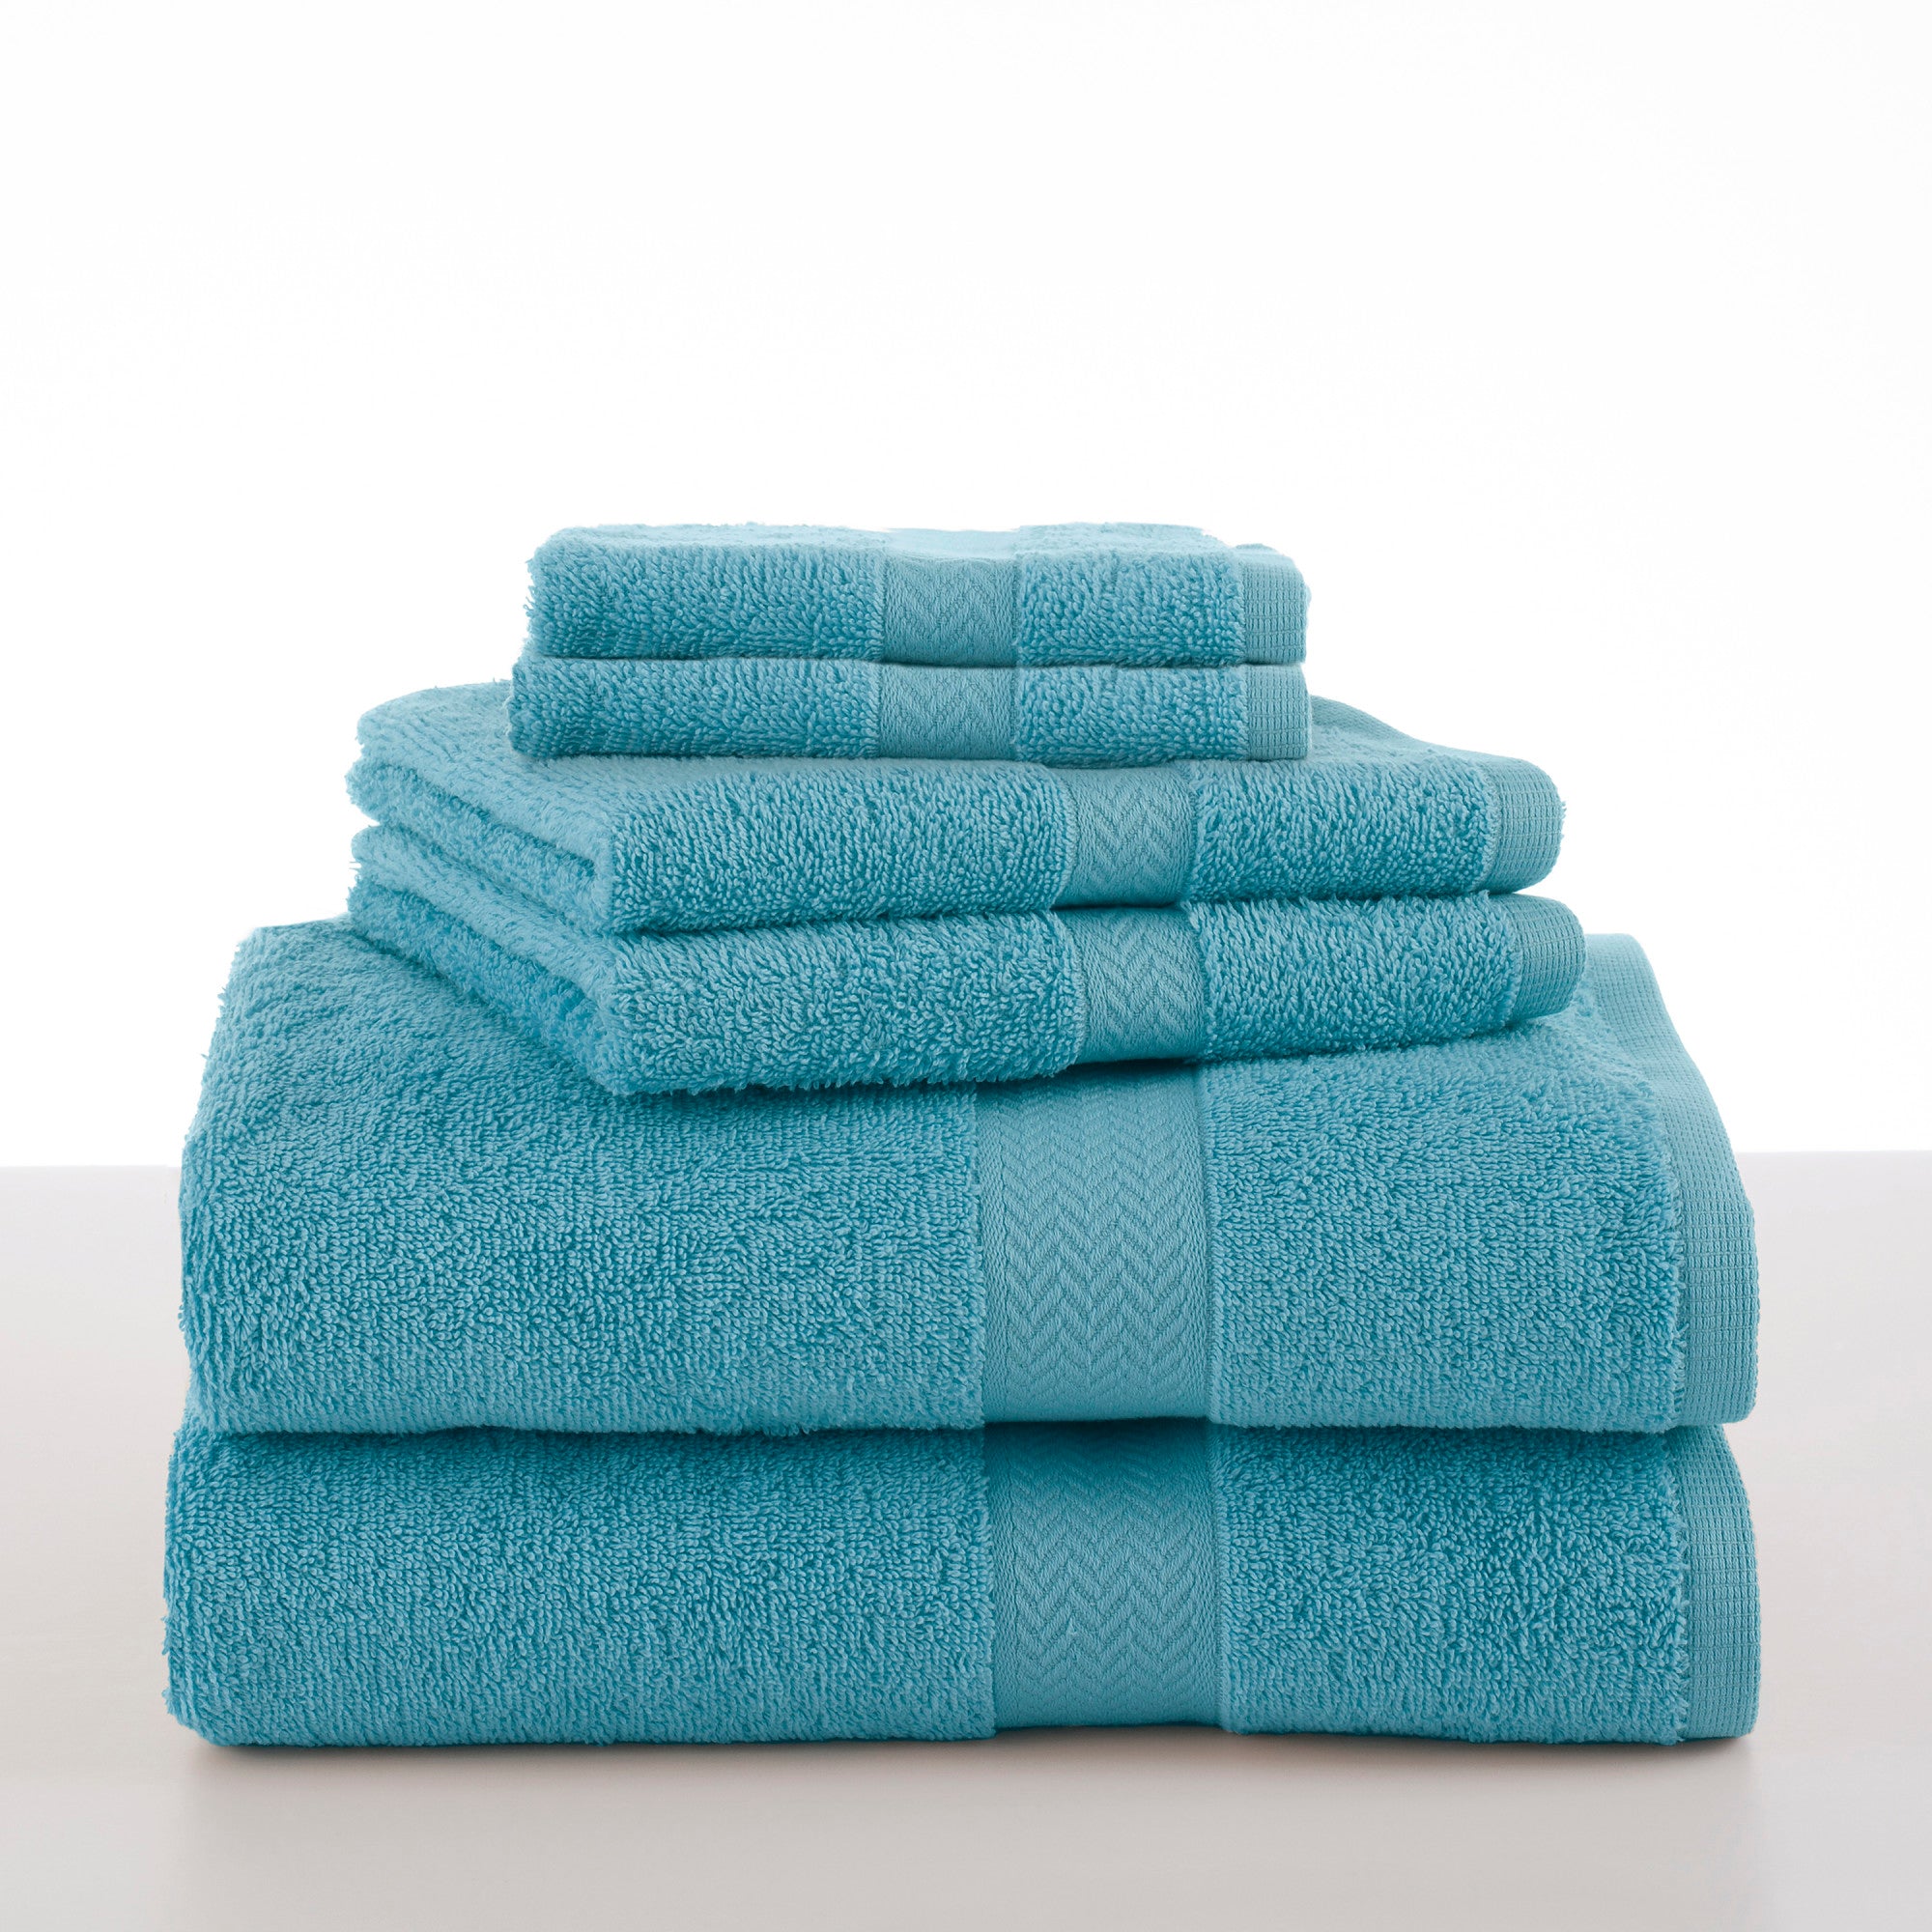 Ring Spun Cotton Bath Towels for Family, Set of 4, Mint Green